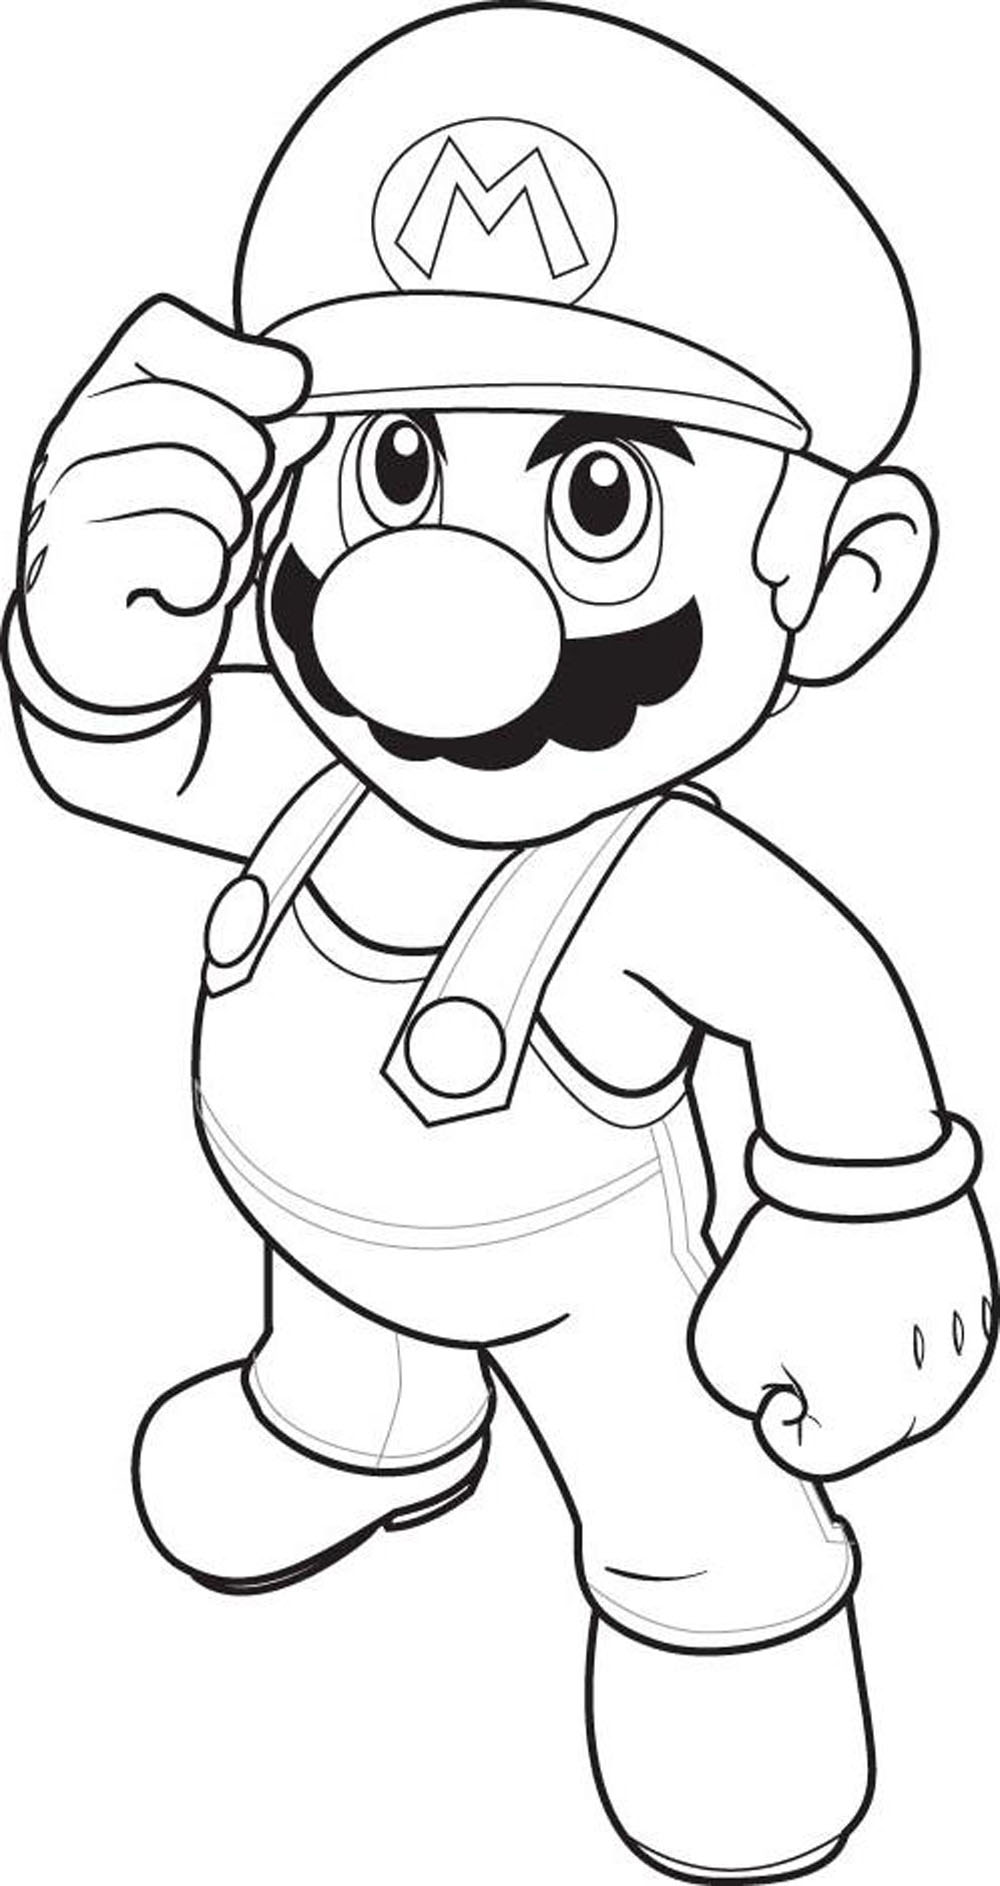 mario-characters-coloring-pages | | BestAppsForKids.com